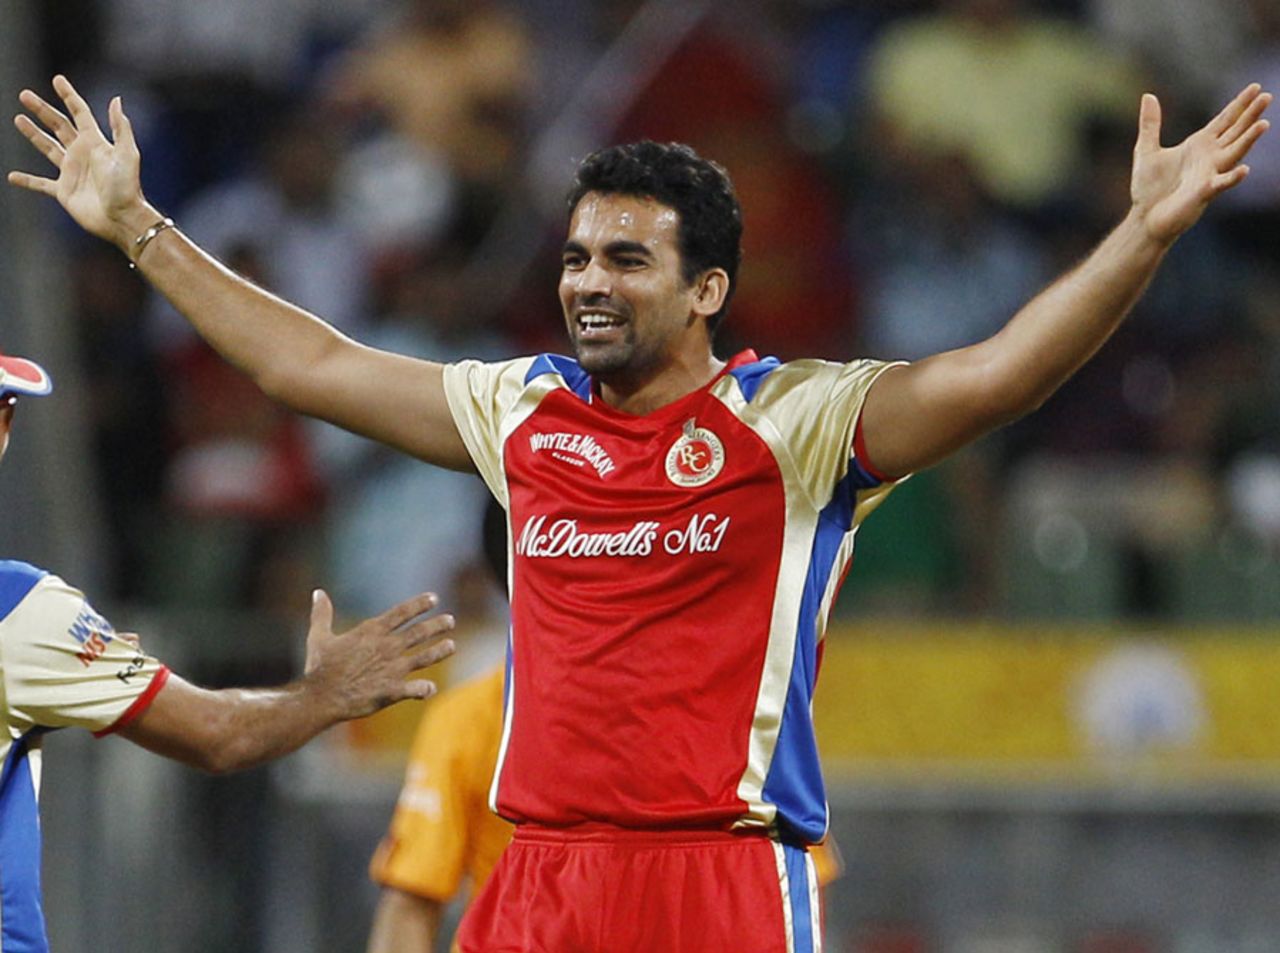 Zaheer Khan is delighted after getting the wicket of Michael Hussey, Bangalore v Chennai, 1st qualifier, IPL 2011, Mumbai, May 24, 2011